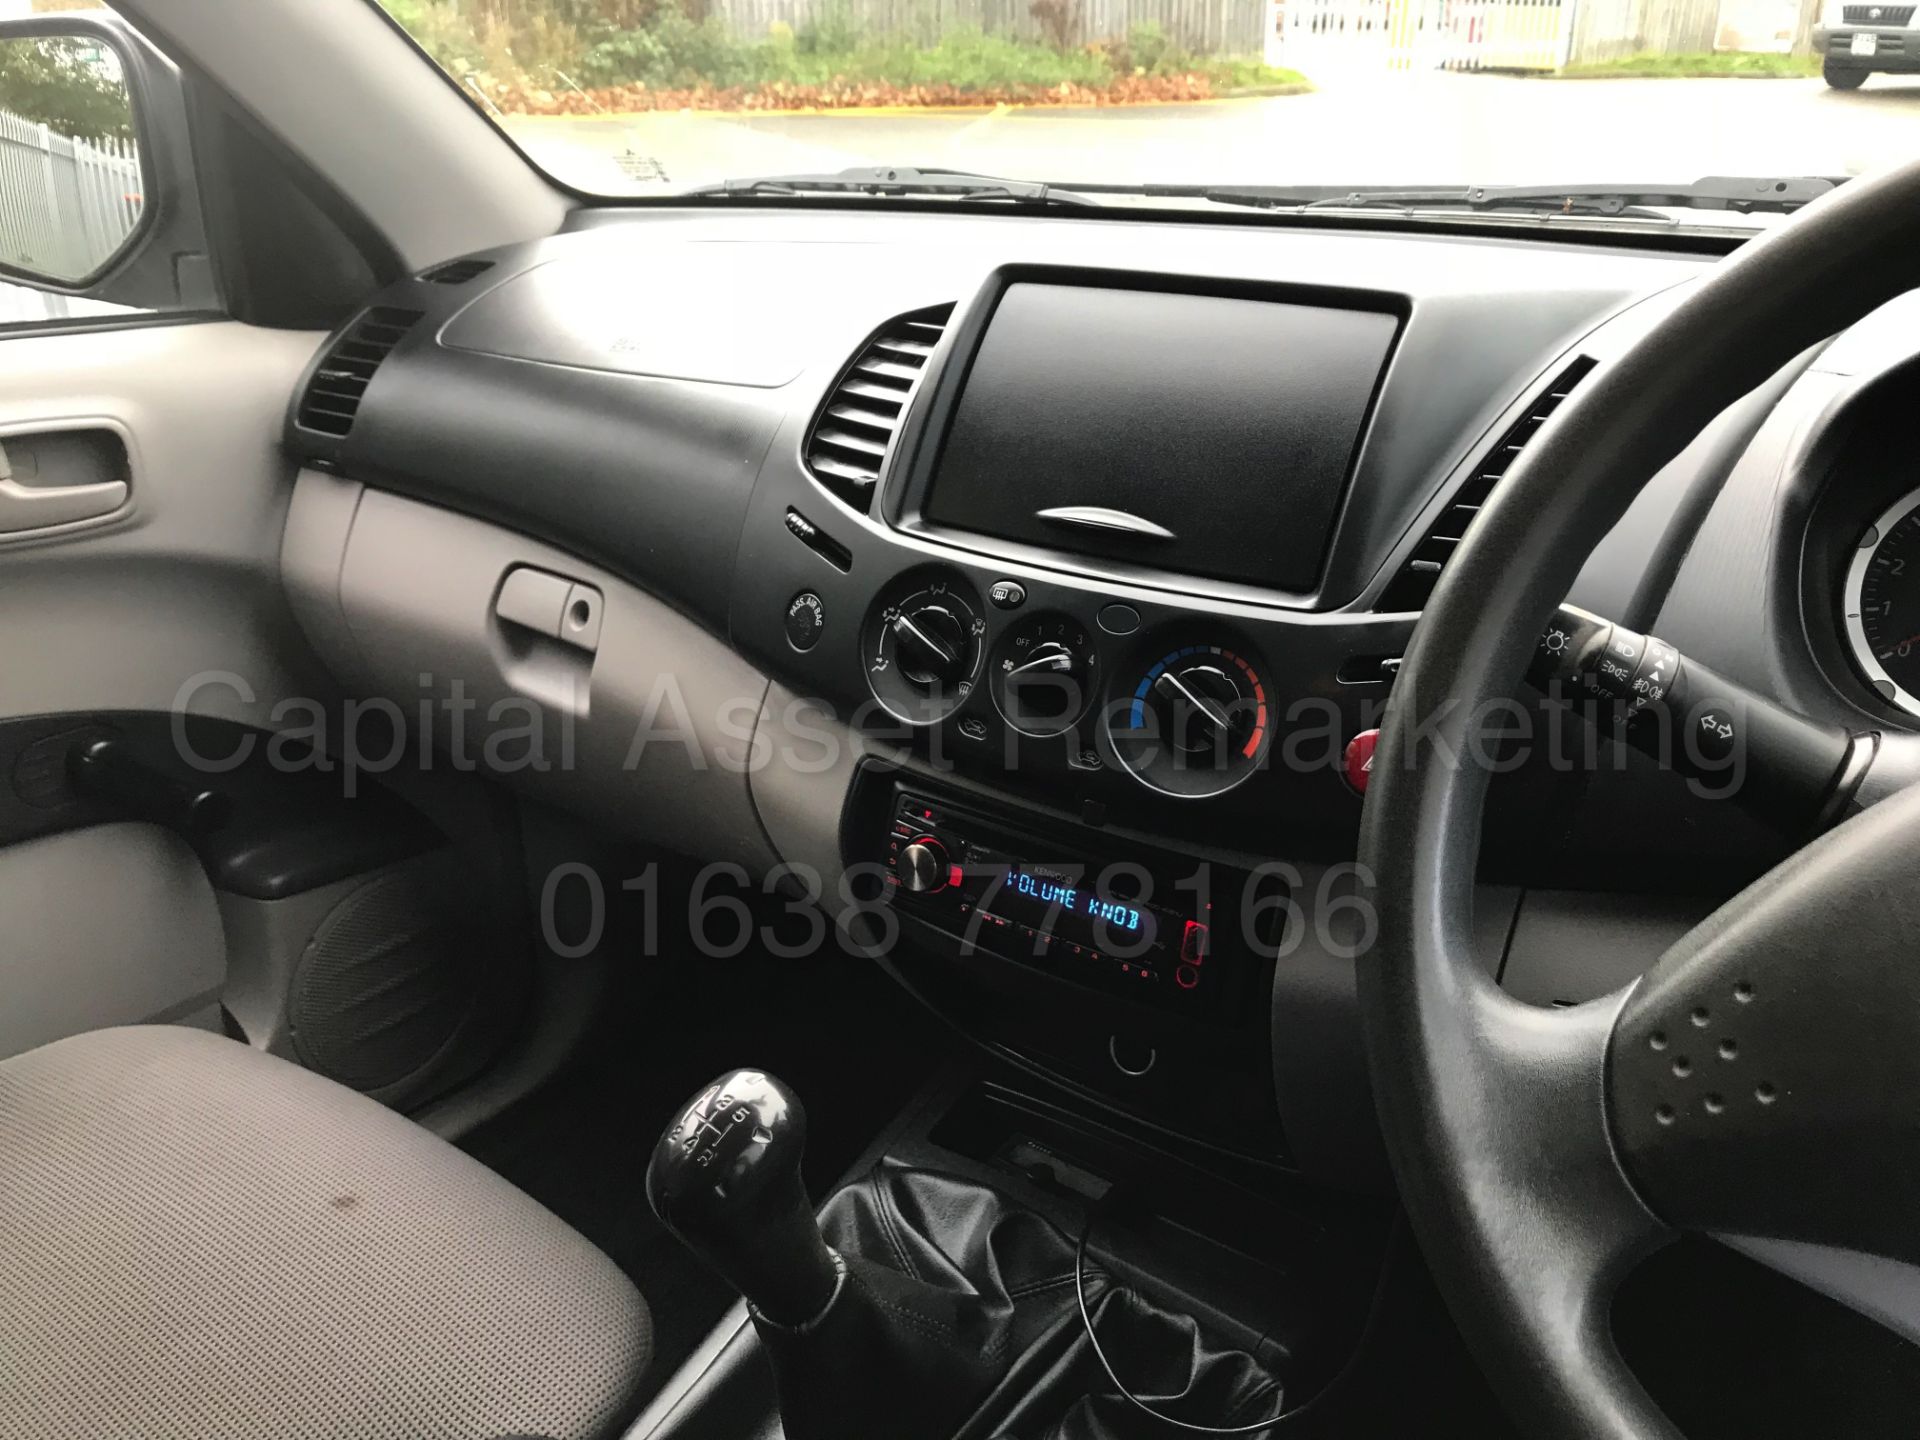 (On Sale) MITSUBISHI L200 DOUBLE CAB PICK-UP (2013 MODEL) '2.5 DI-D - 136 BHP' (1 OWNER) *31K MILES* - Image 21 of 26